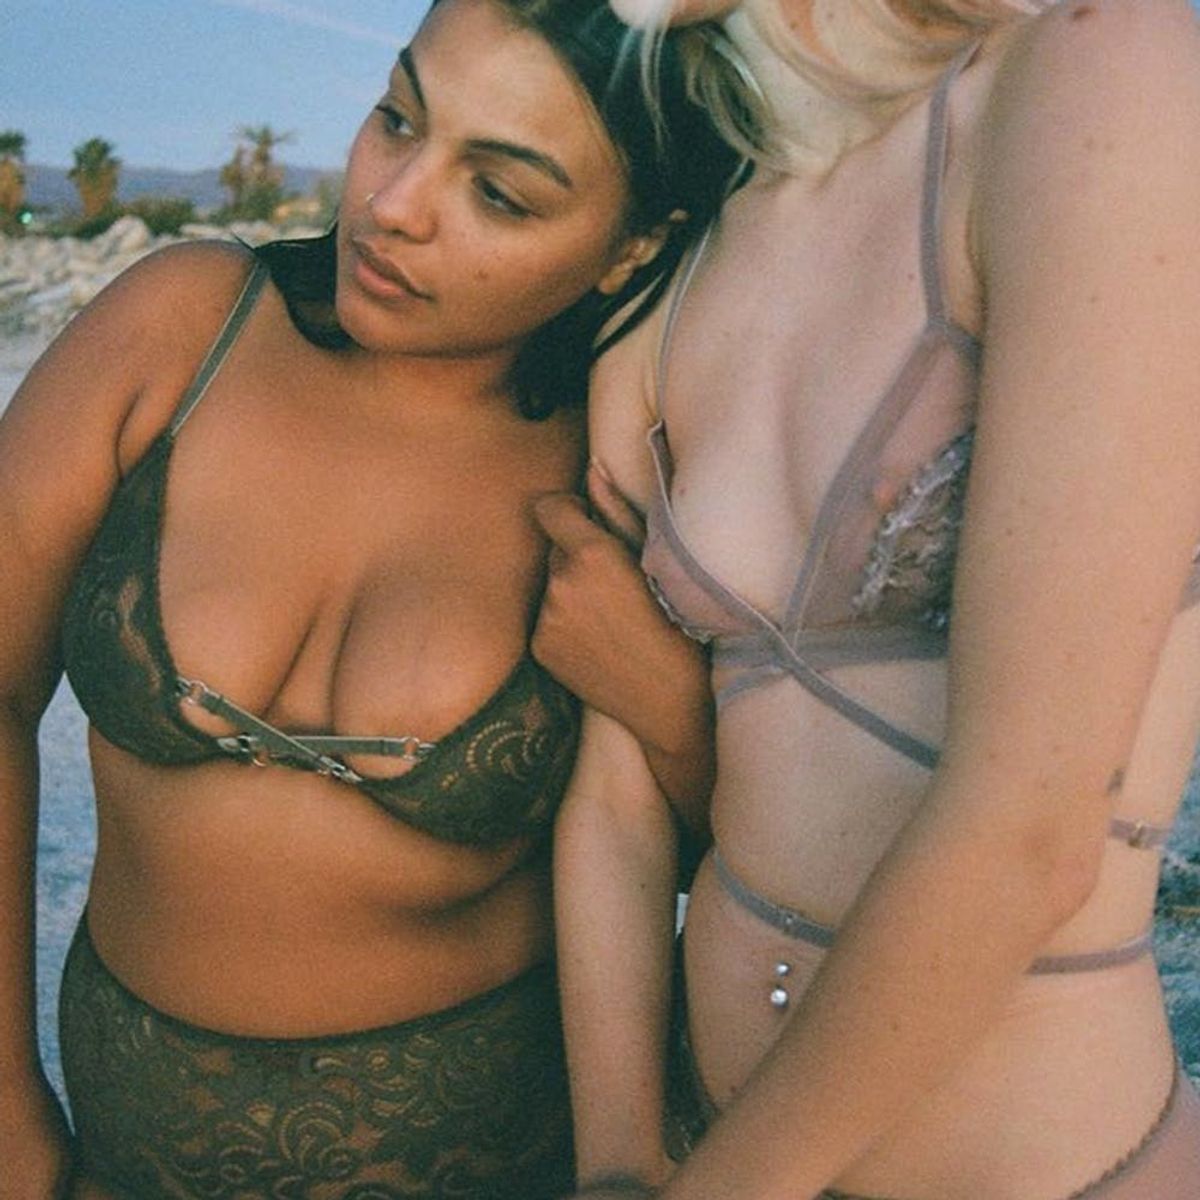 Lonely Label’s Body Positive Campaign Just Changed the Way We Look at Lingerie